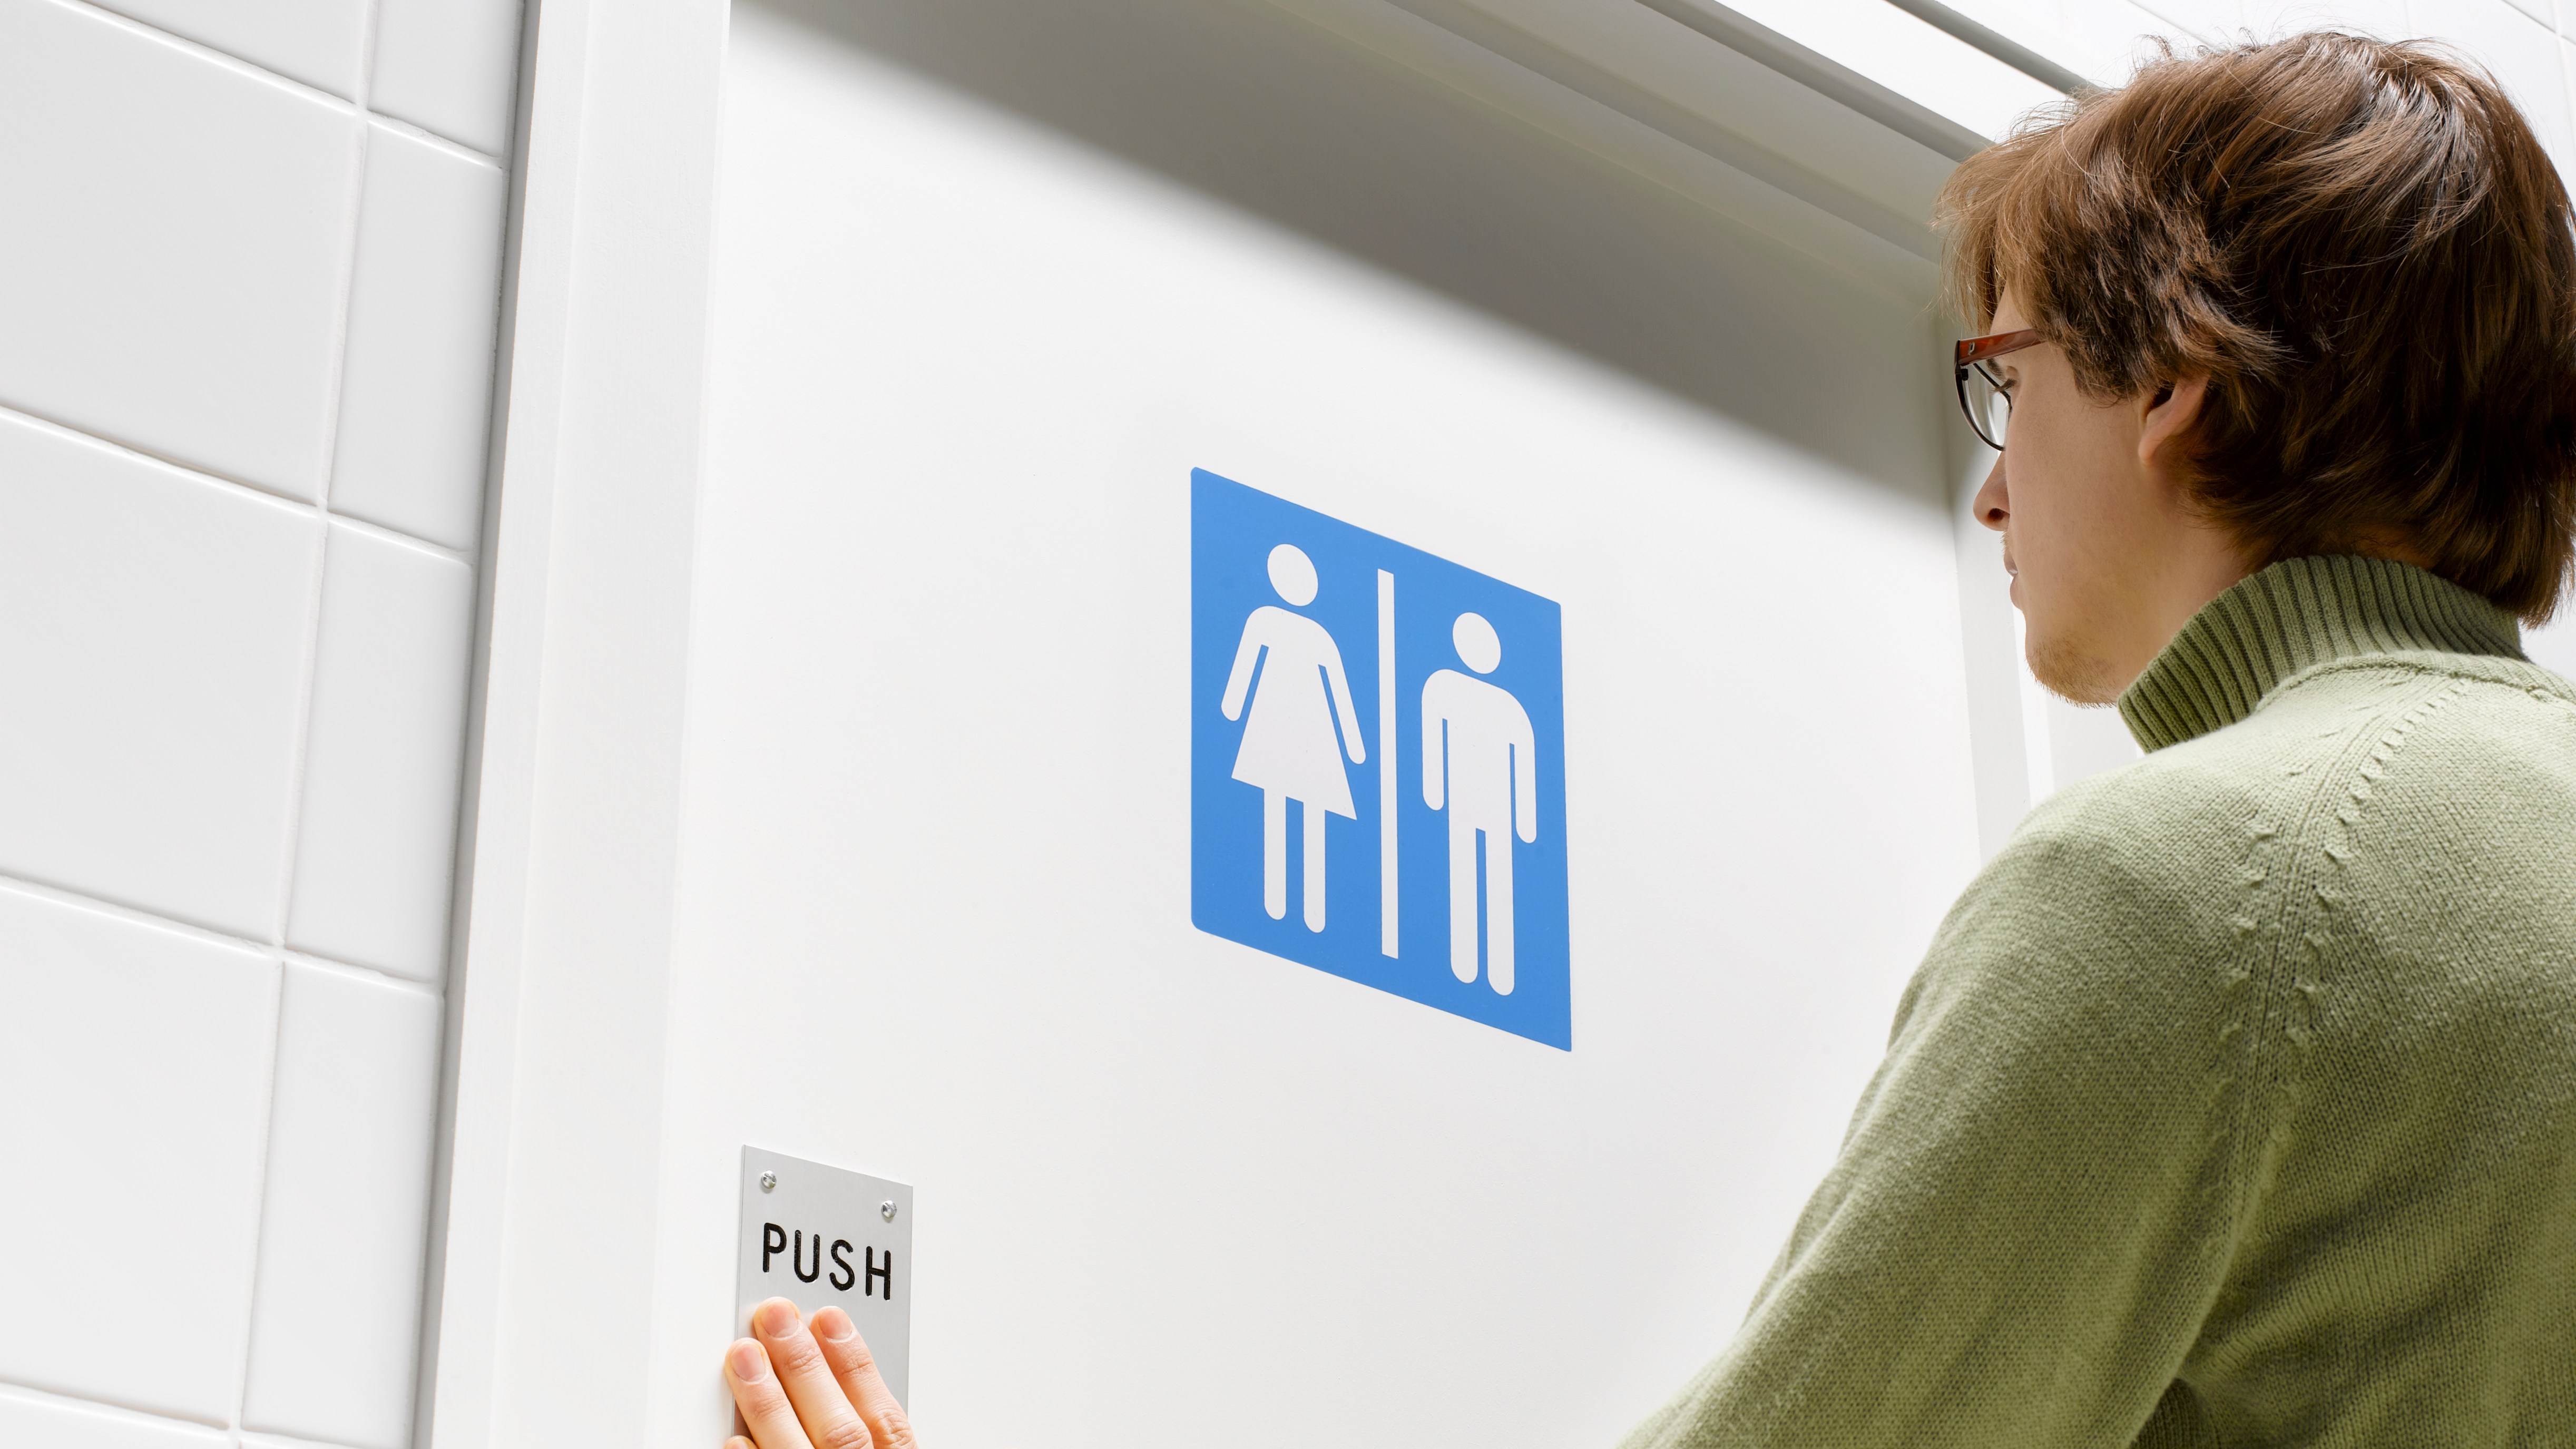 A YouGov poll found that 48 per cent of people feel uncomfortable using gender-neutral lavatories